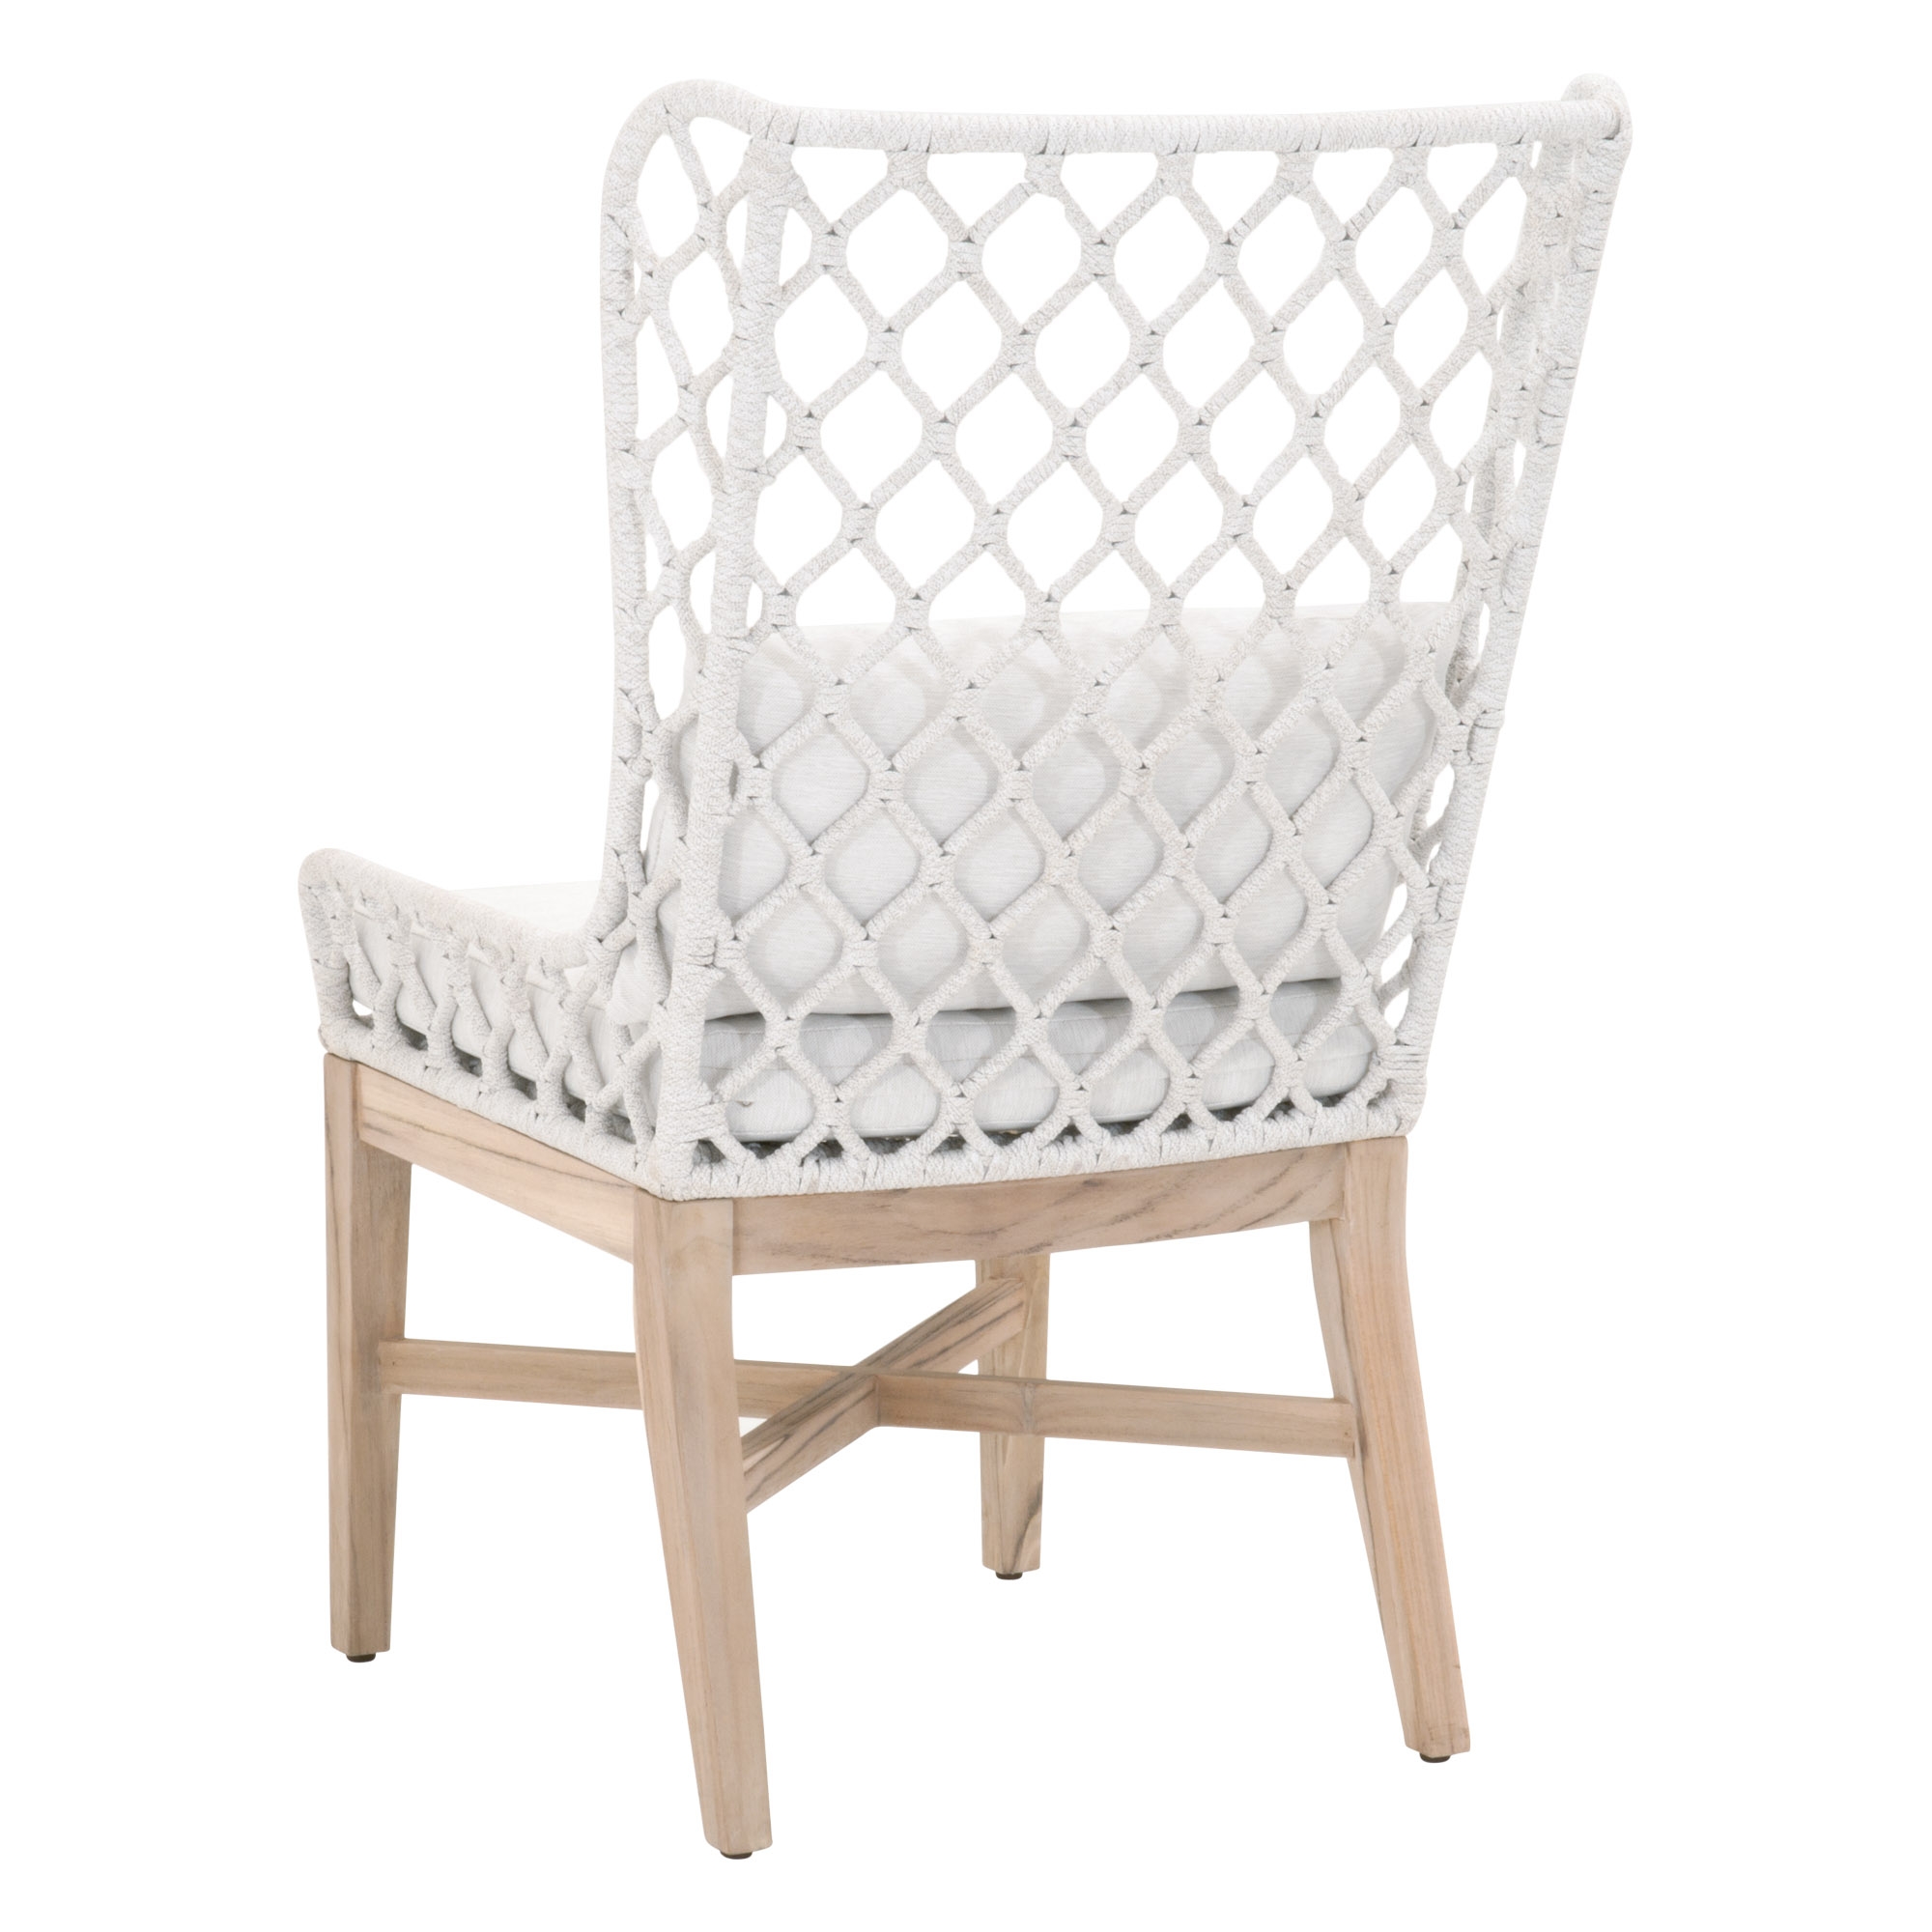 Lattis Outdoor Wing Chair, White - Image 3